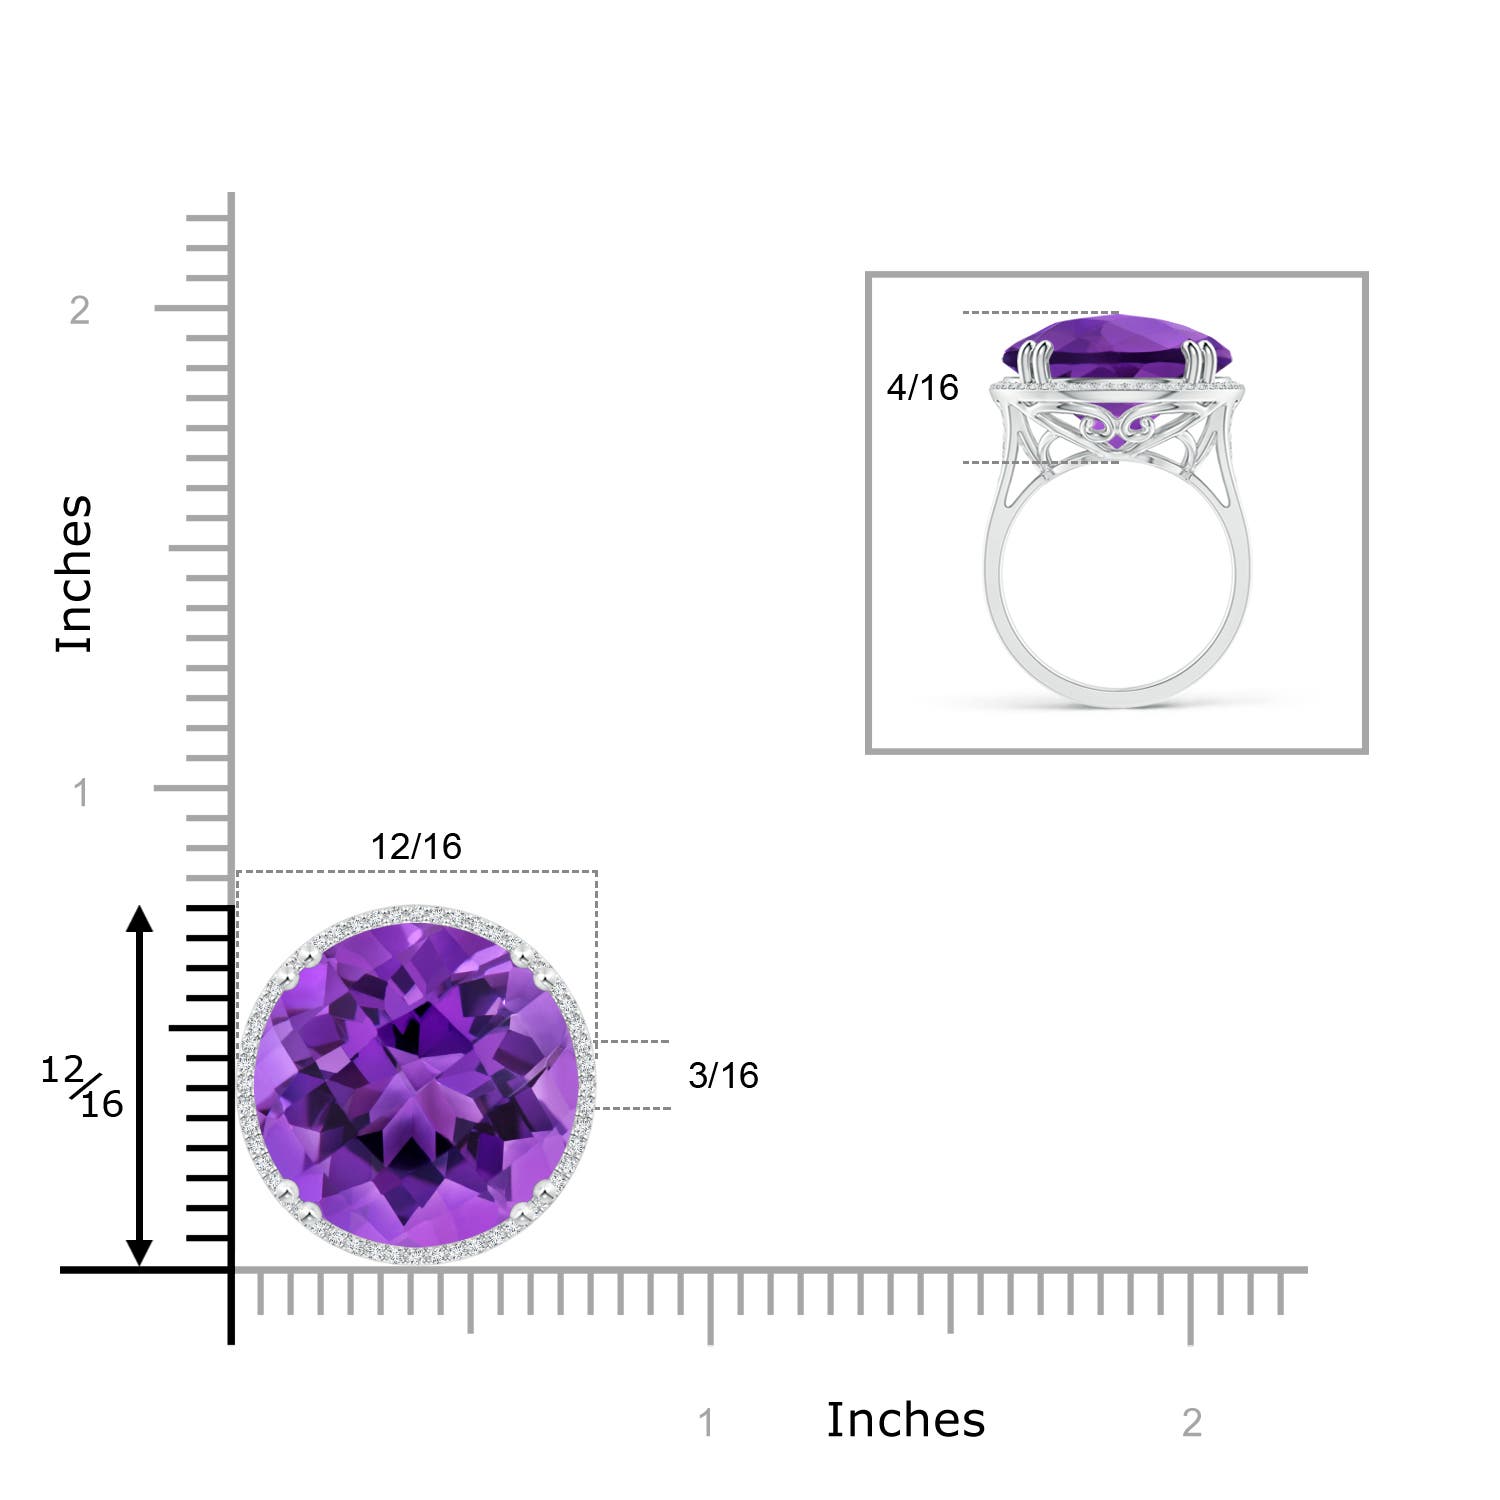 AAA - Amethyst / 18.23 CT / 14 KT White Gold